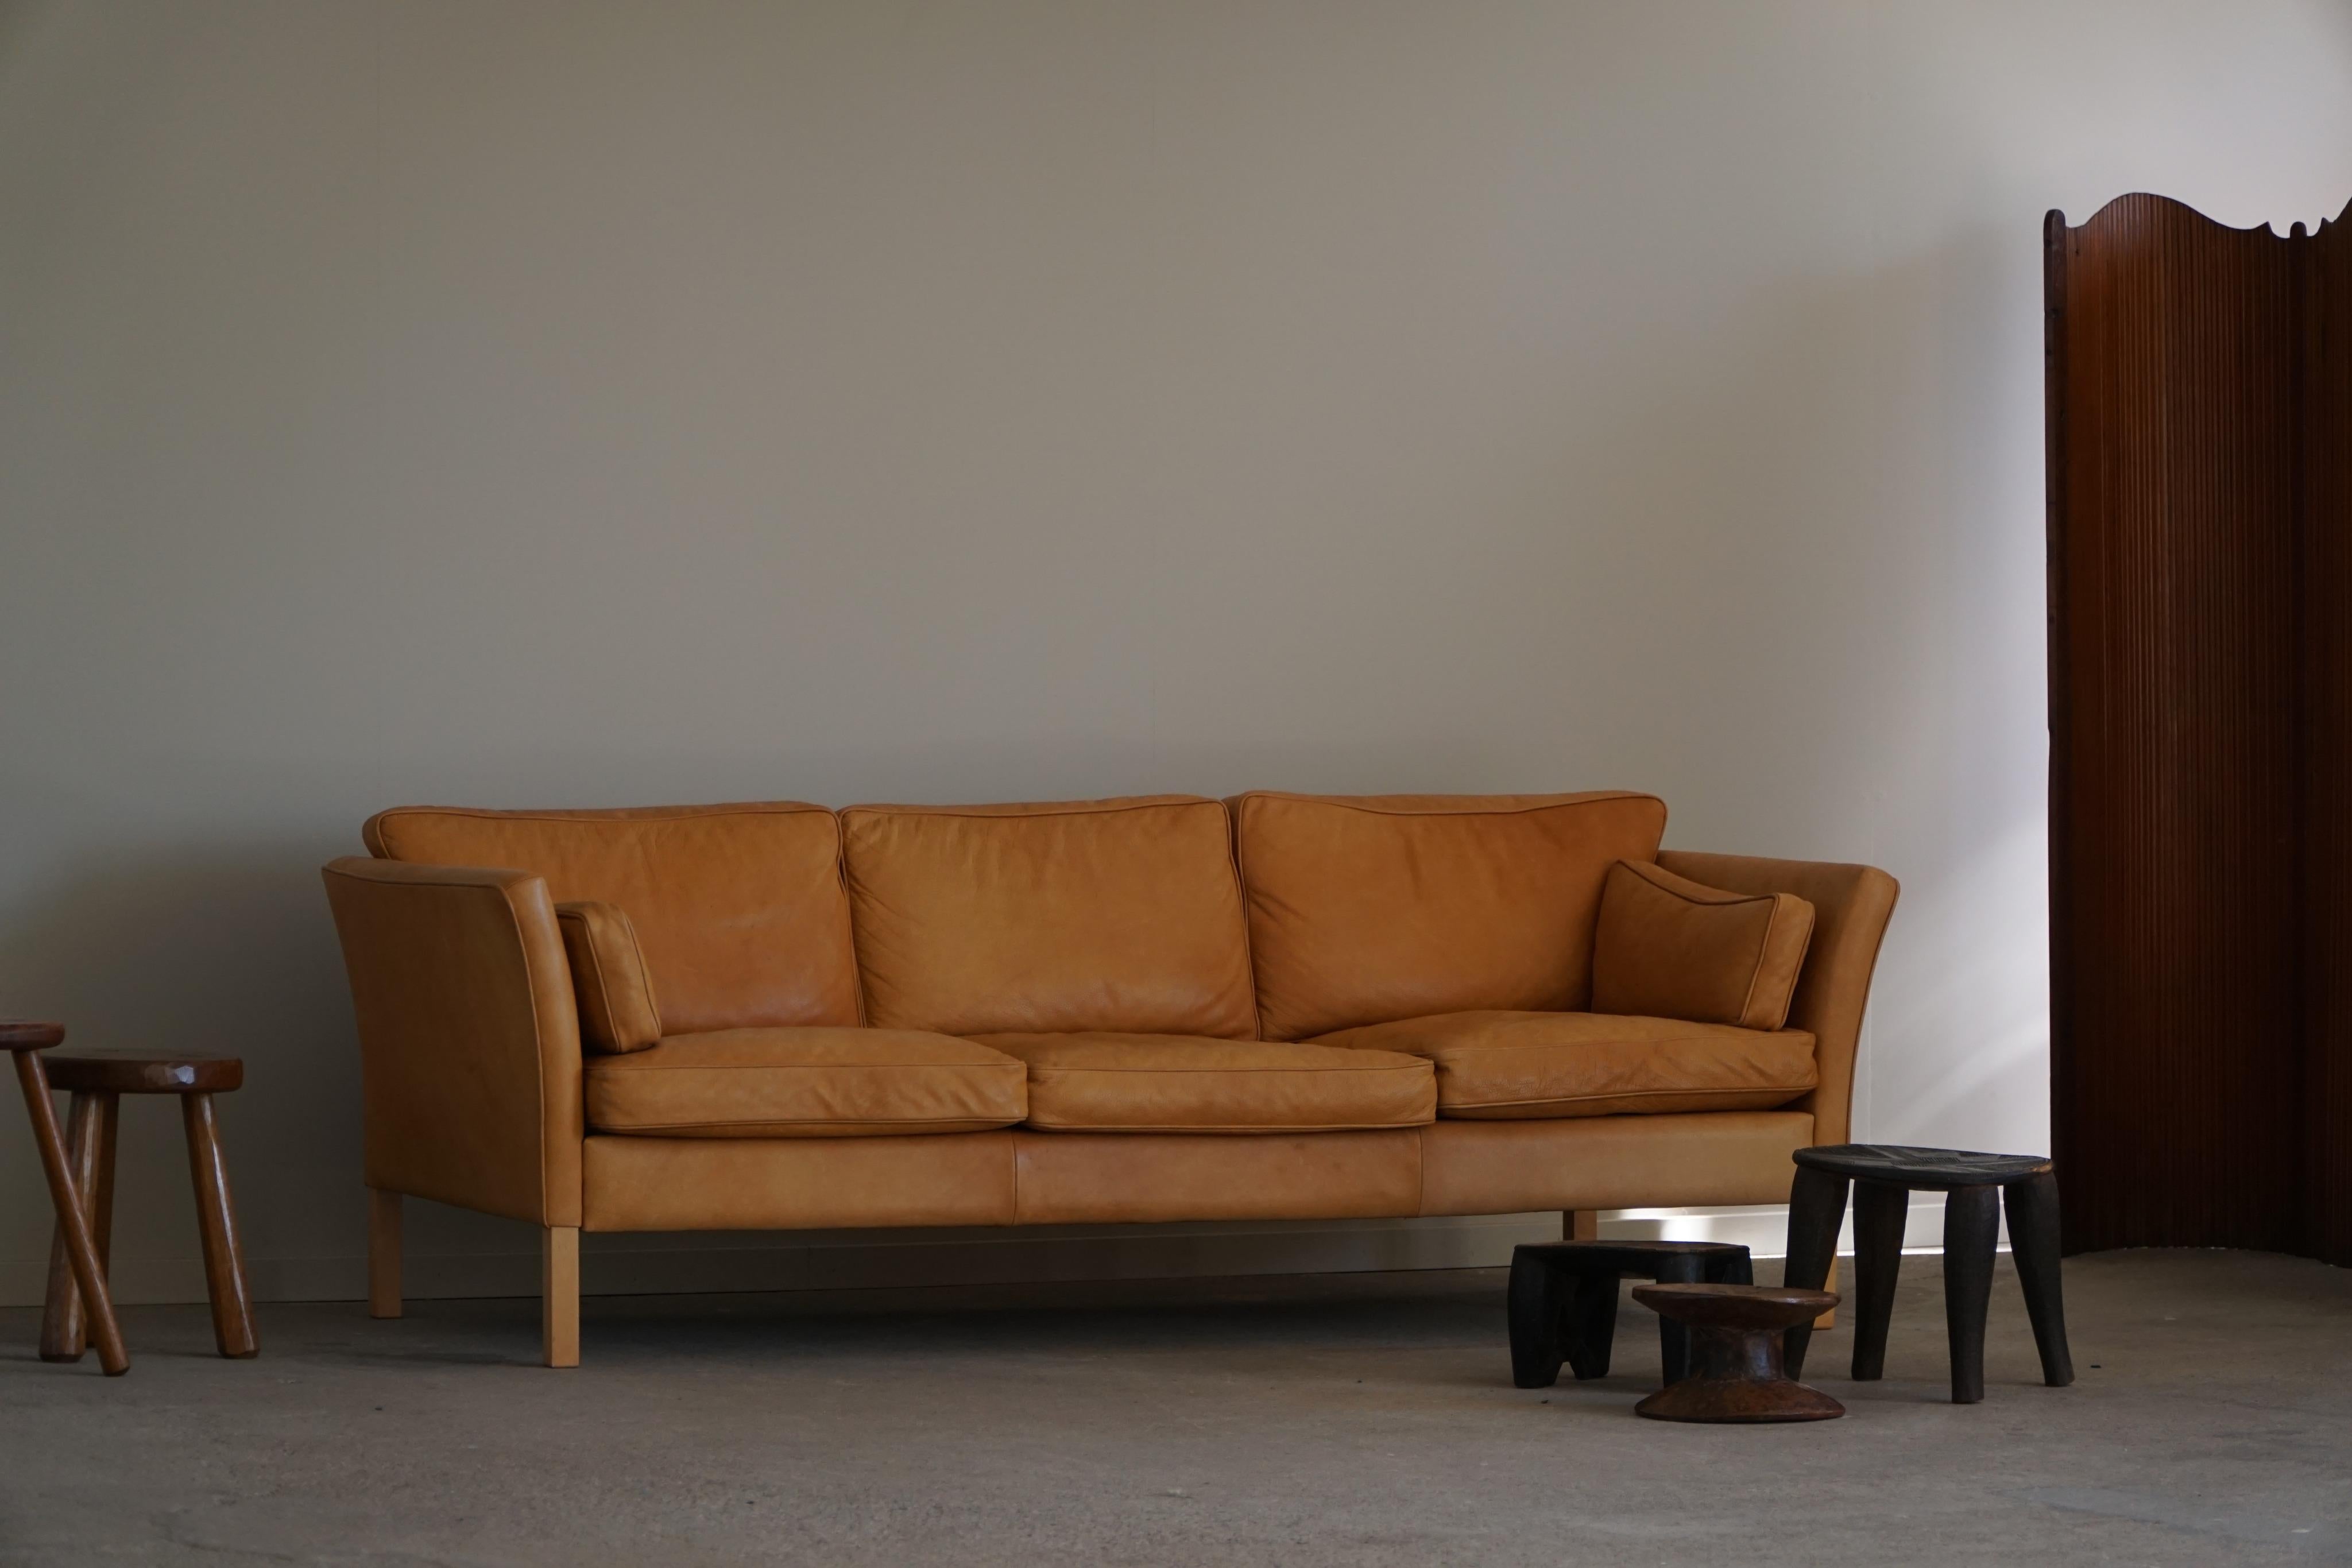 A truly beautiful classic Danish Modern three seater sofa, made by Stouby in Denmark. The sofa is upholstered in high-quality cognac brown leather, which has a rich and warm patina that gives it a vintage and luxurious look. The feets are made in